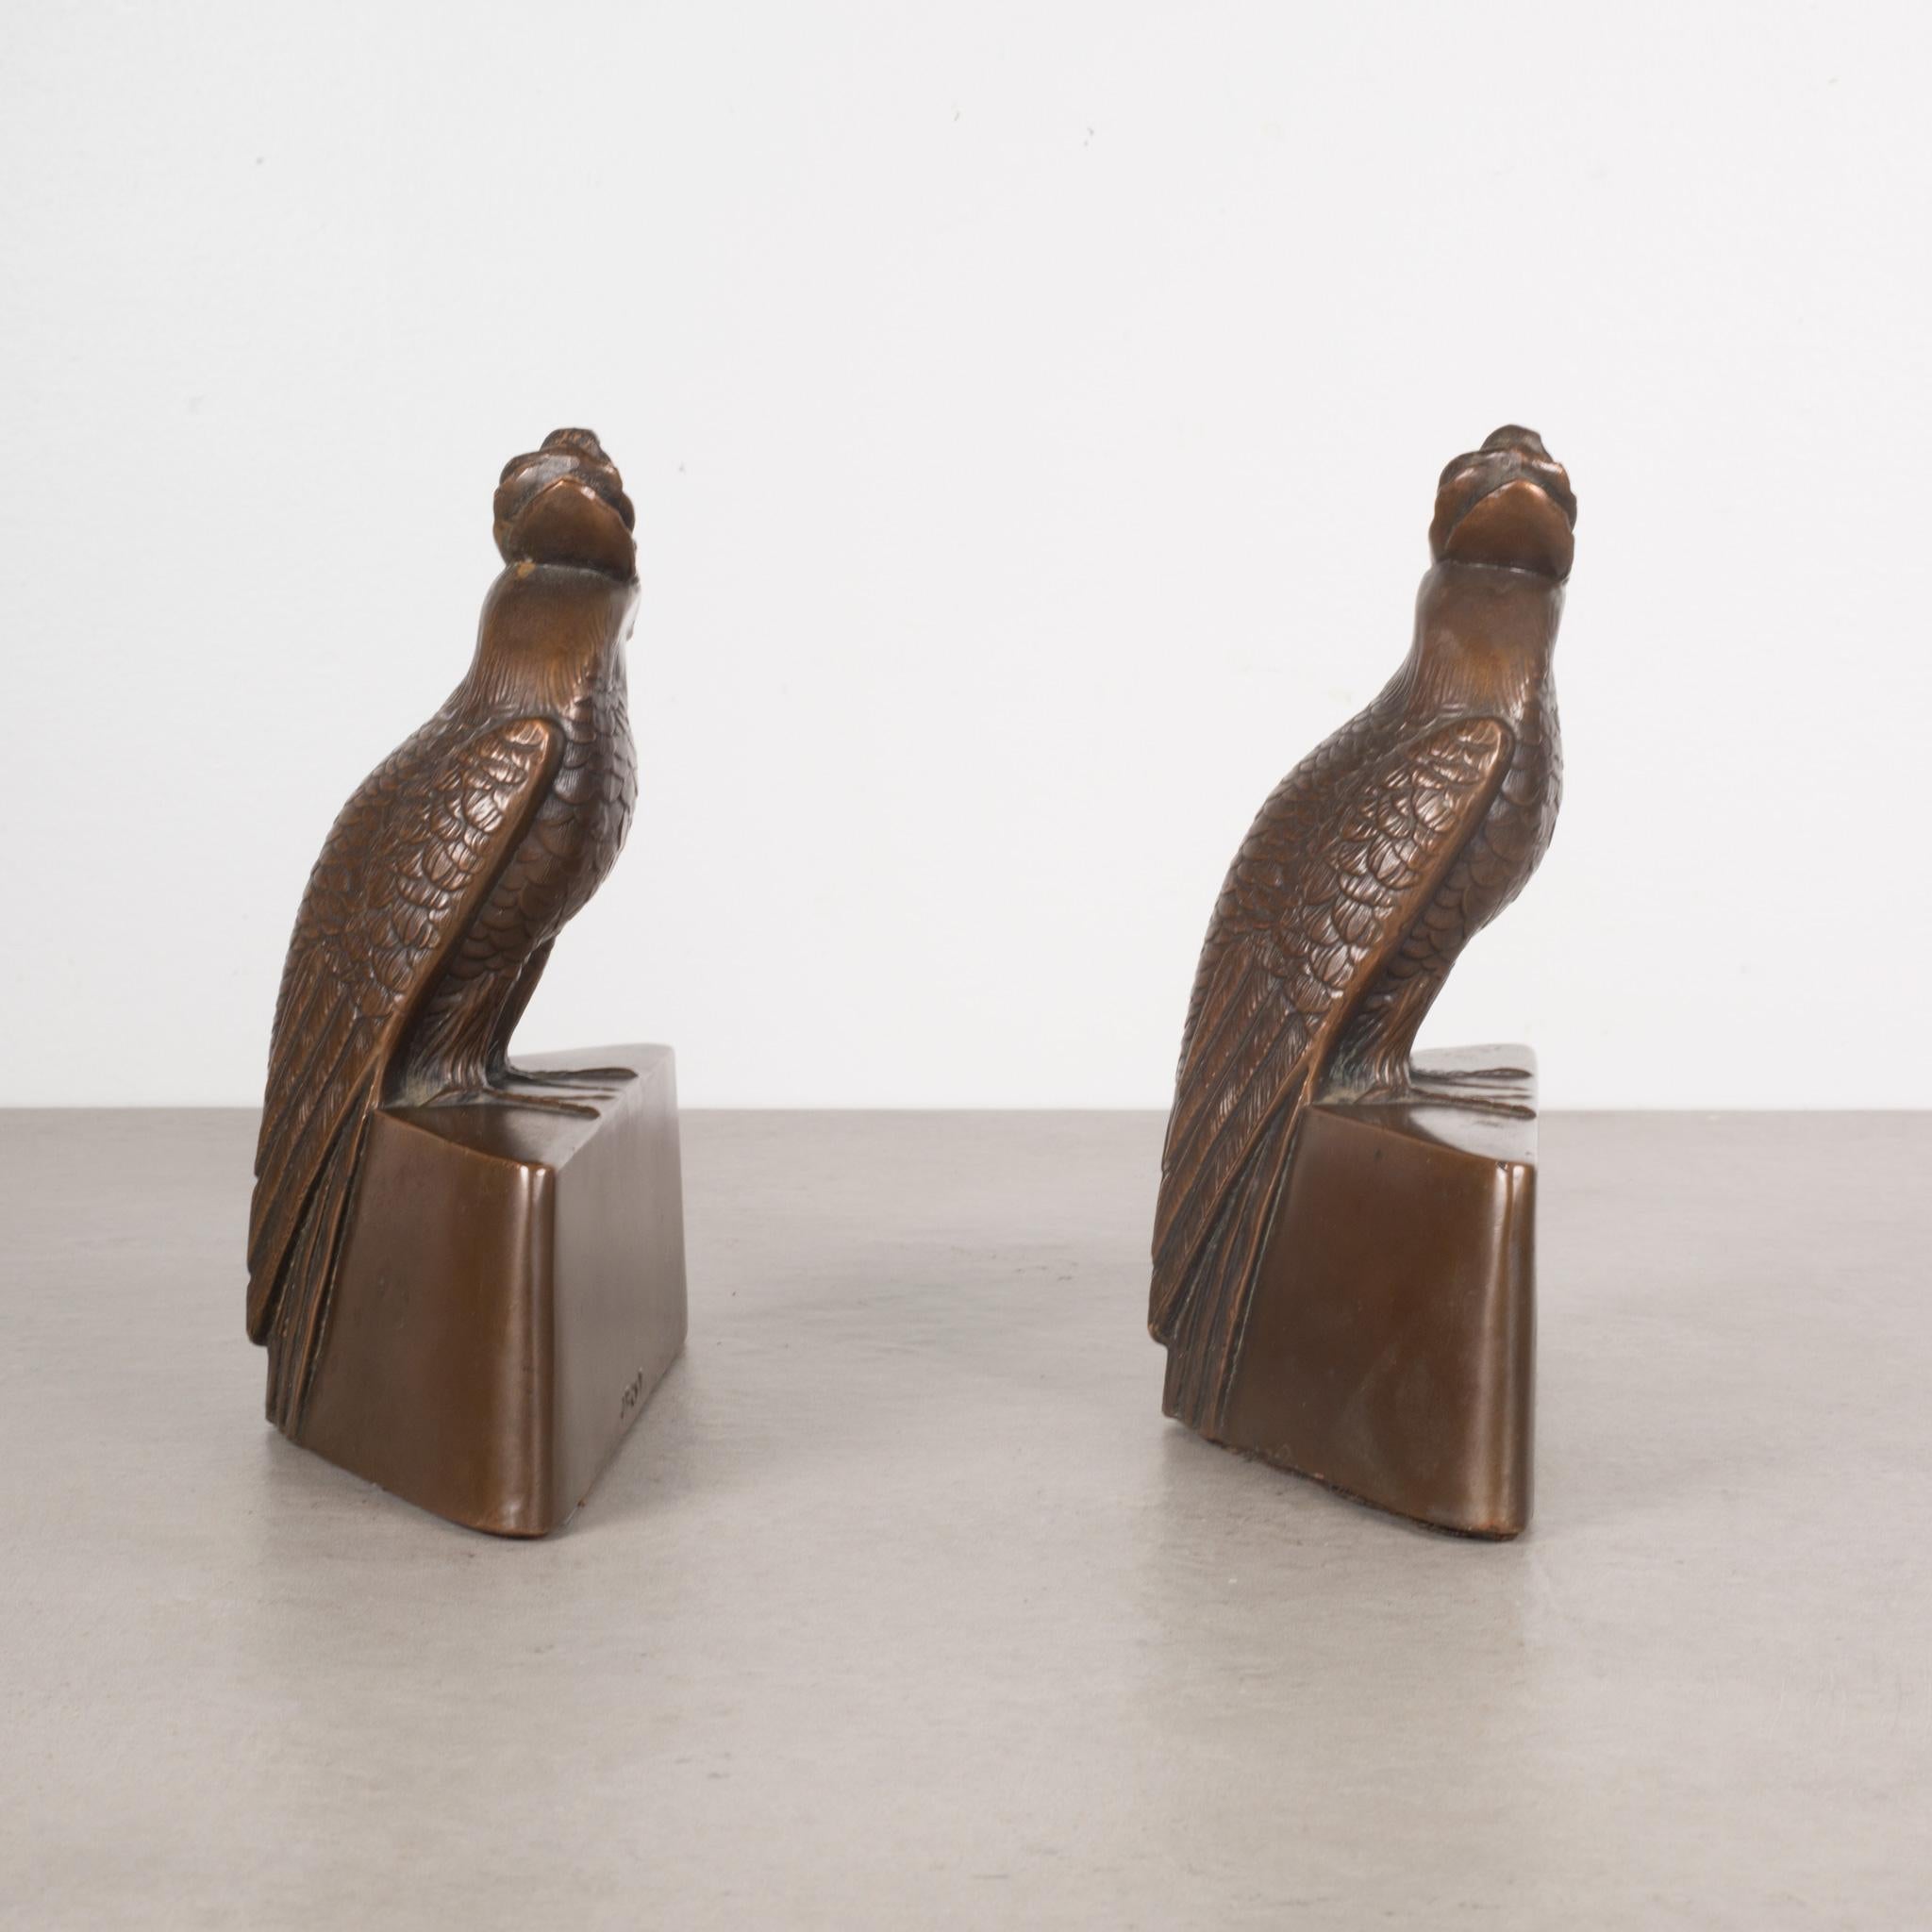 ABOUT

Rare Art Deco bronze plated parrot bookends manufactured by Jennings Brothers. Stamped 